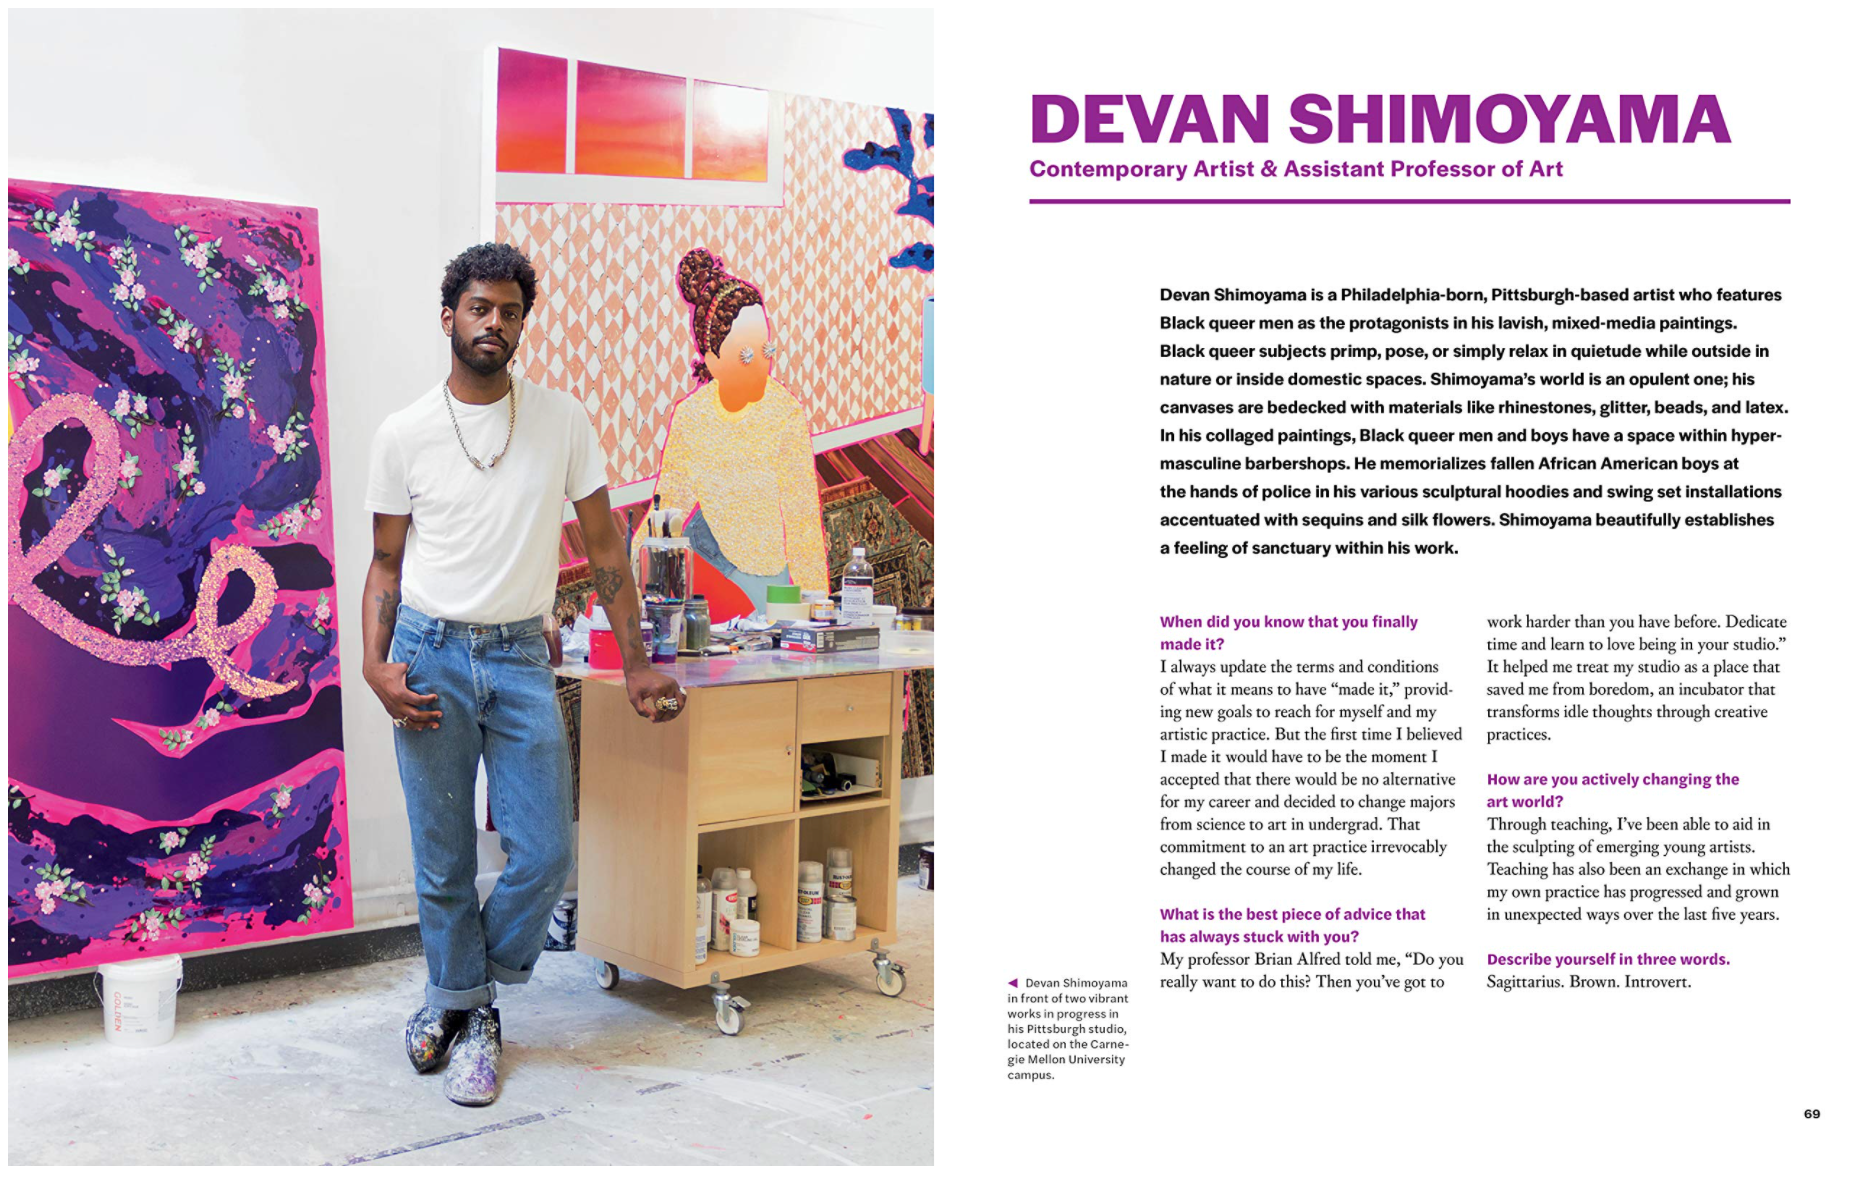 Page 68/69 from ‘We Are Here’ featuring Devan Shimoyama